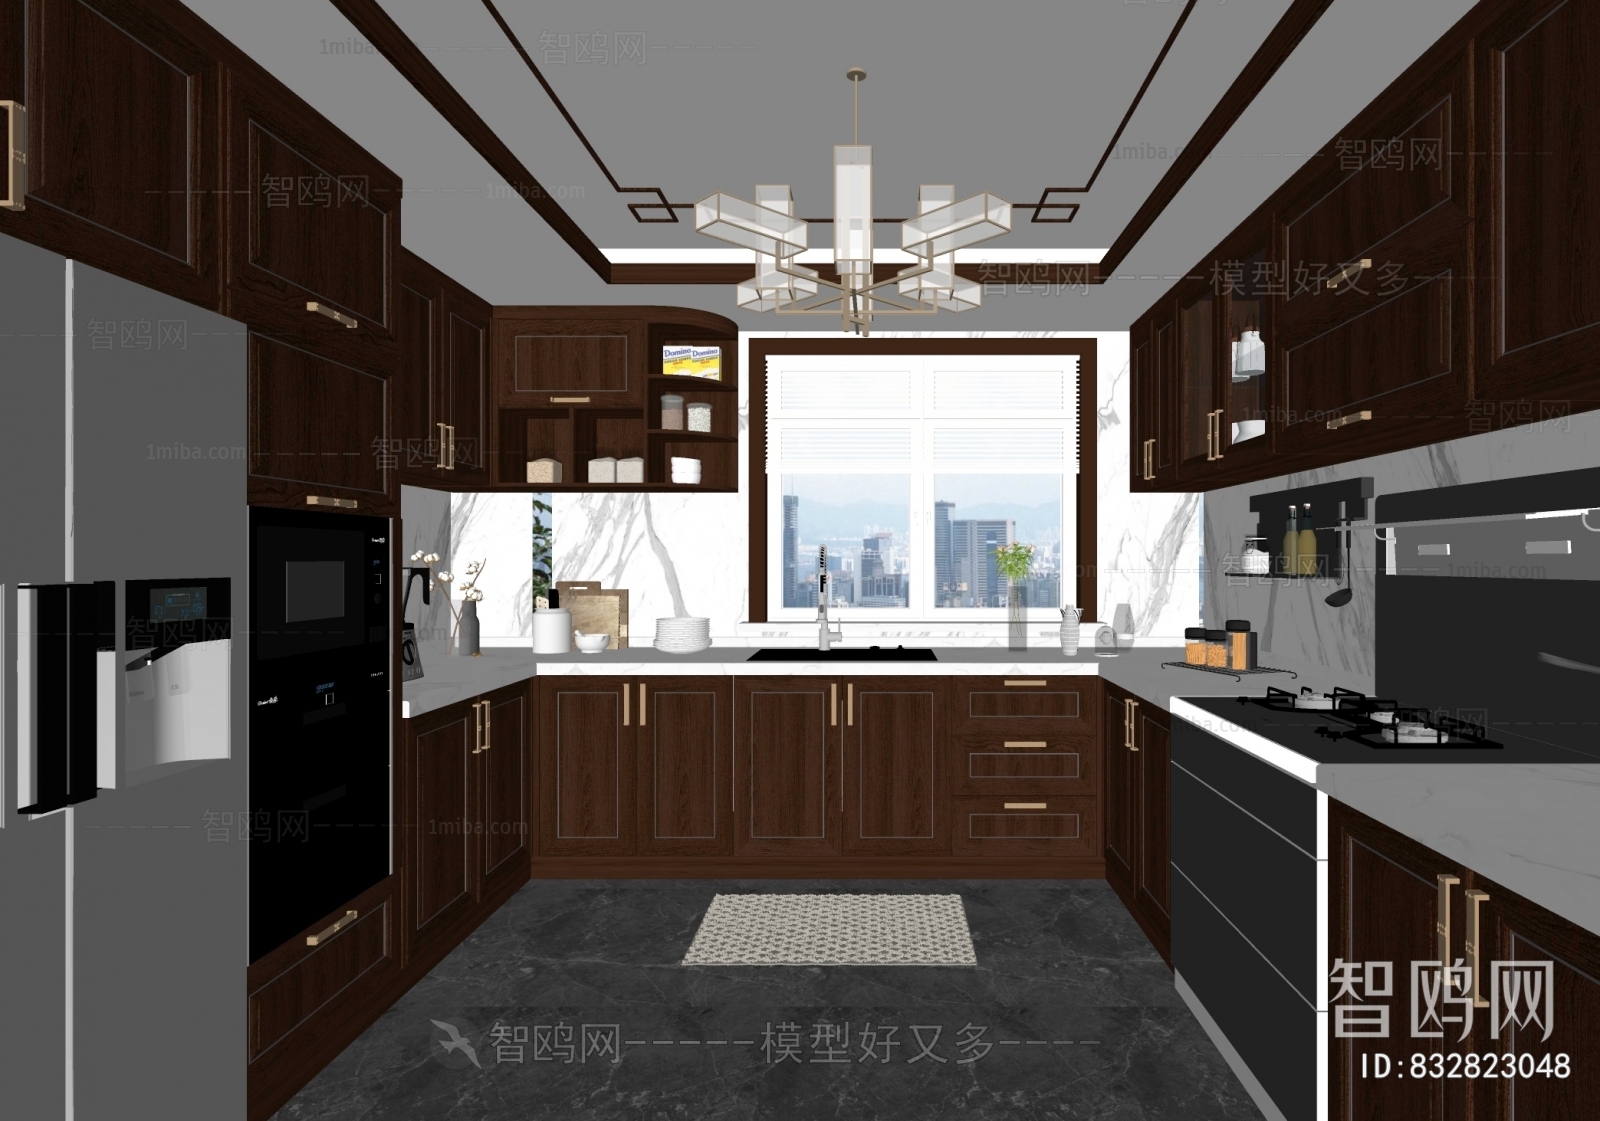 New Chinese Style The Kitchen